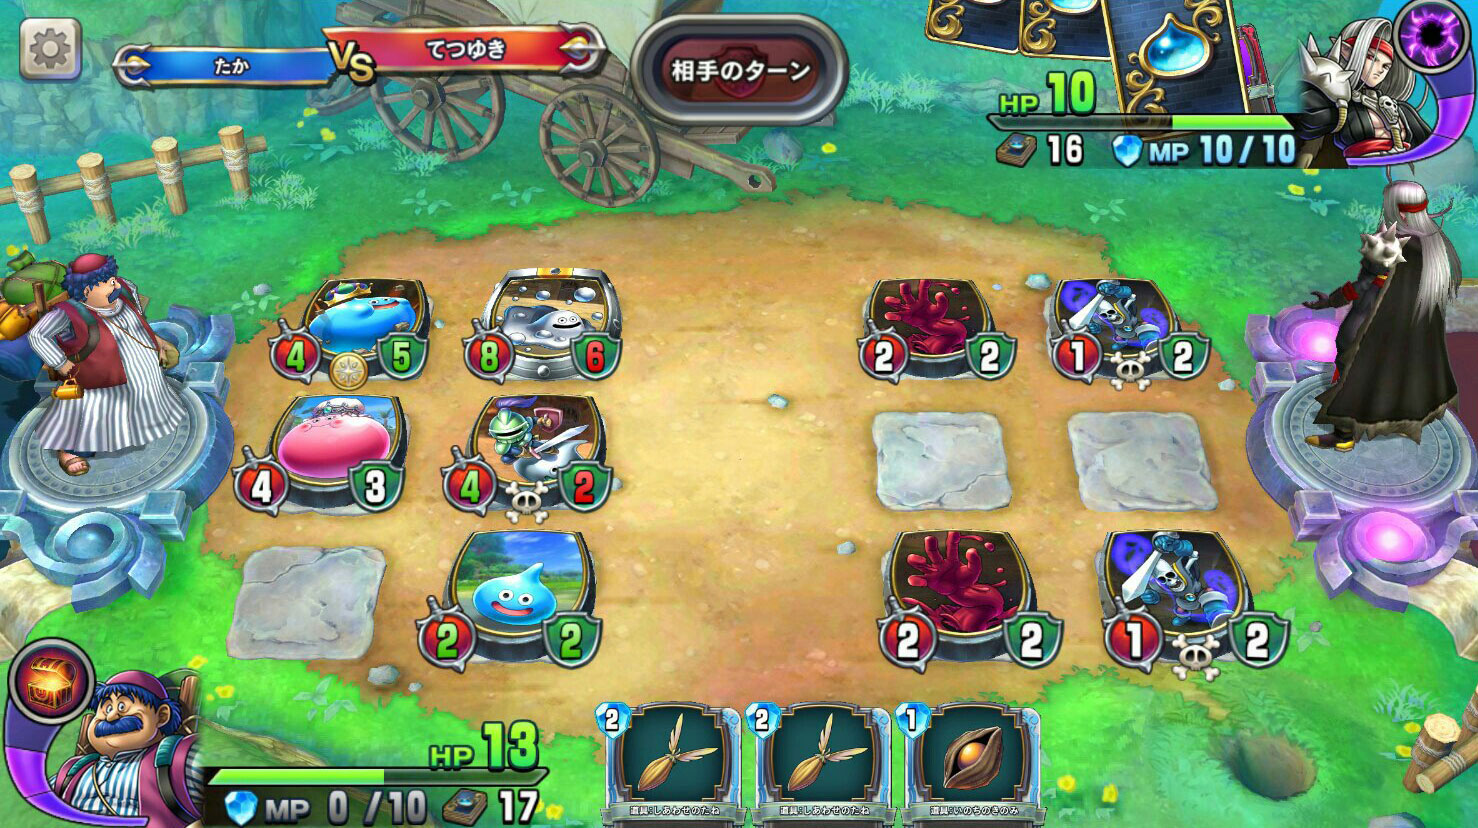 2game-Dragon-Quest-Rivals-mobile-9.jpg (1478×828)